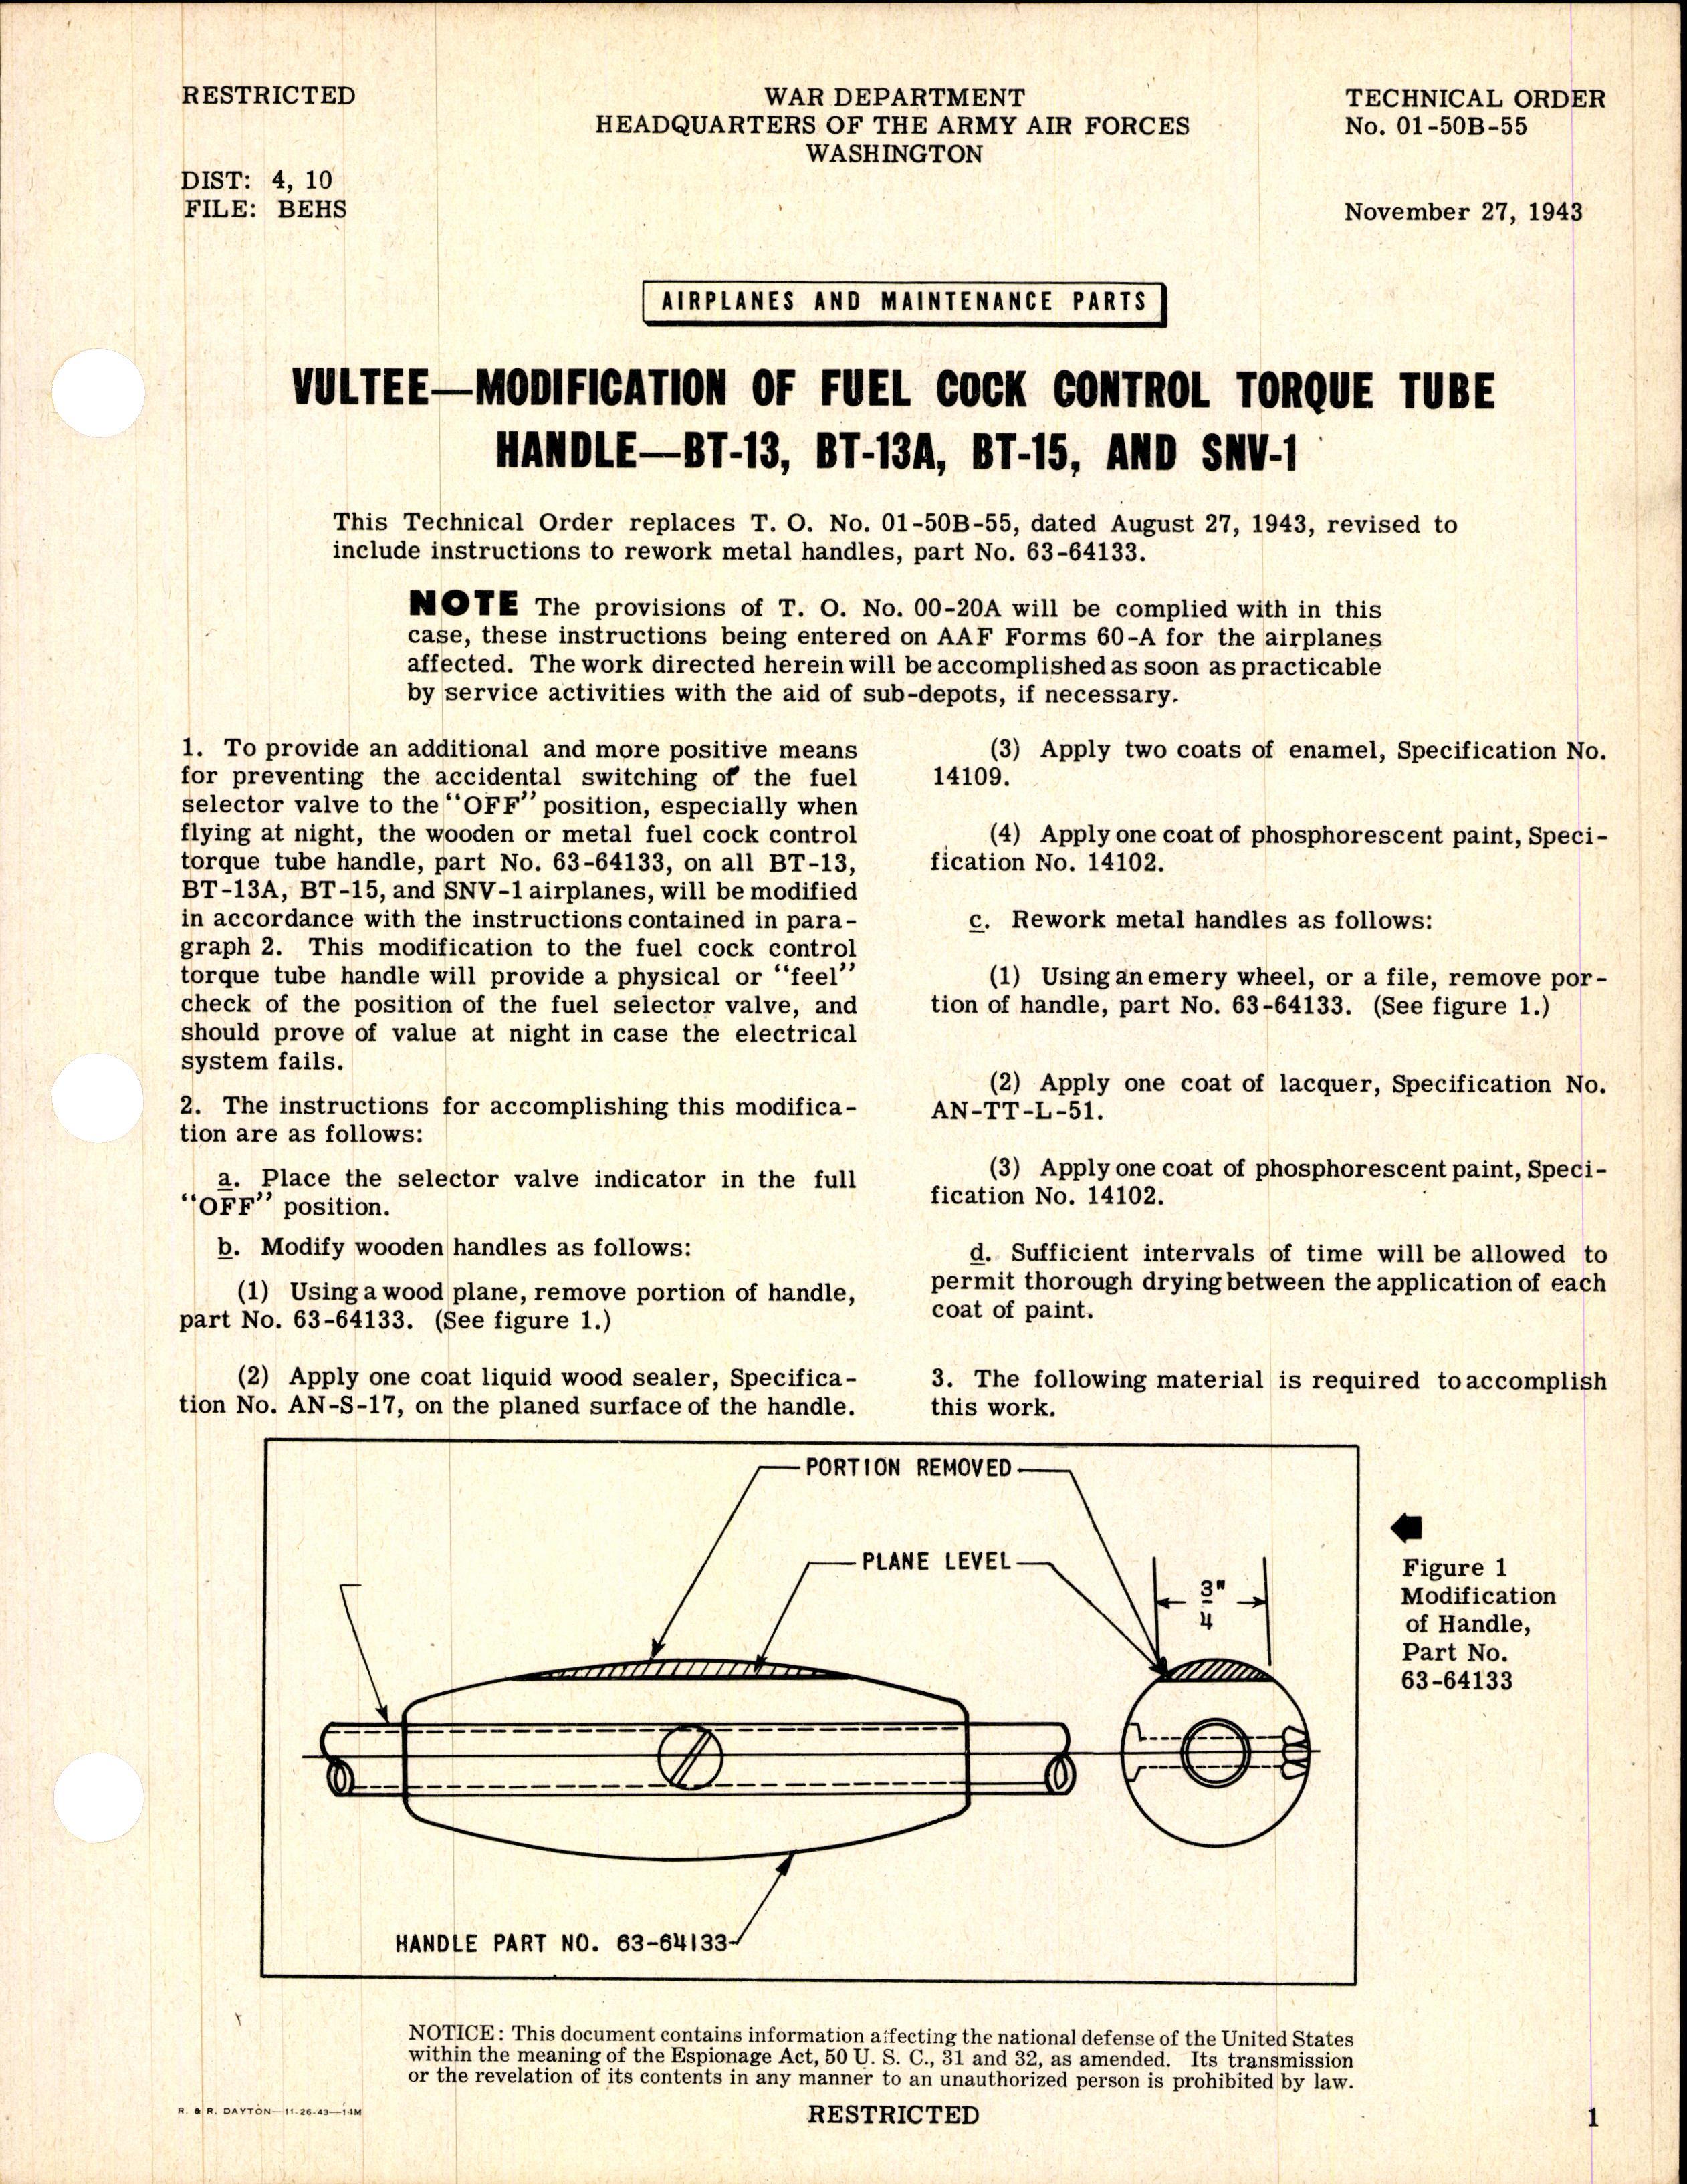 Sample page 1 from AirCorps Library document: Modification of Fuel Cock Control Torque Tube Handle for BT-13, BT-13A, BT-15 and SNV-1